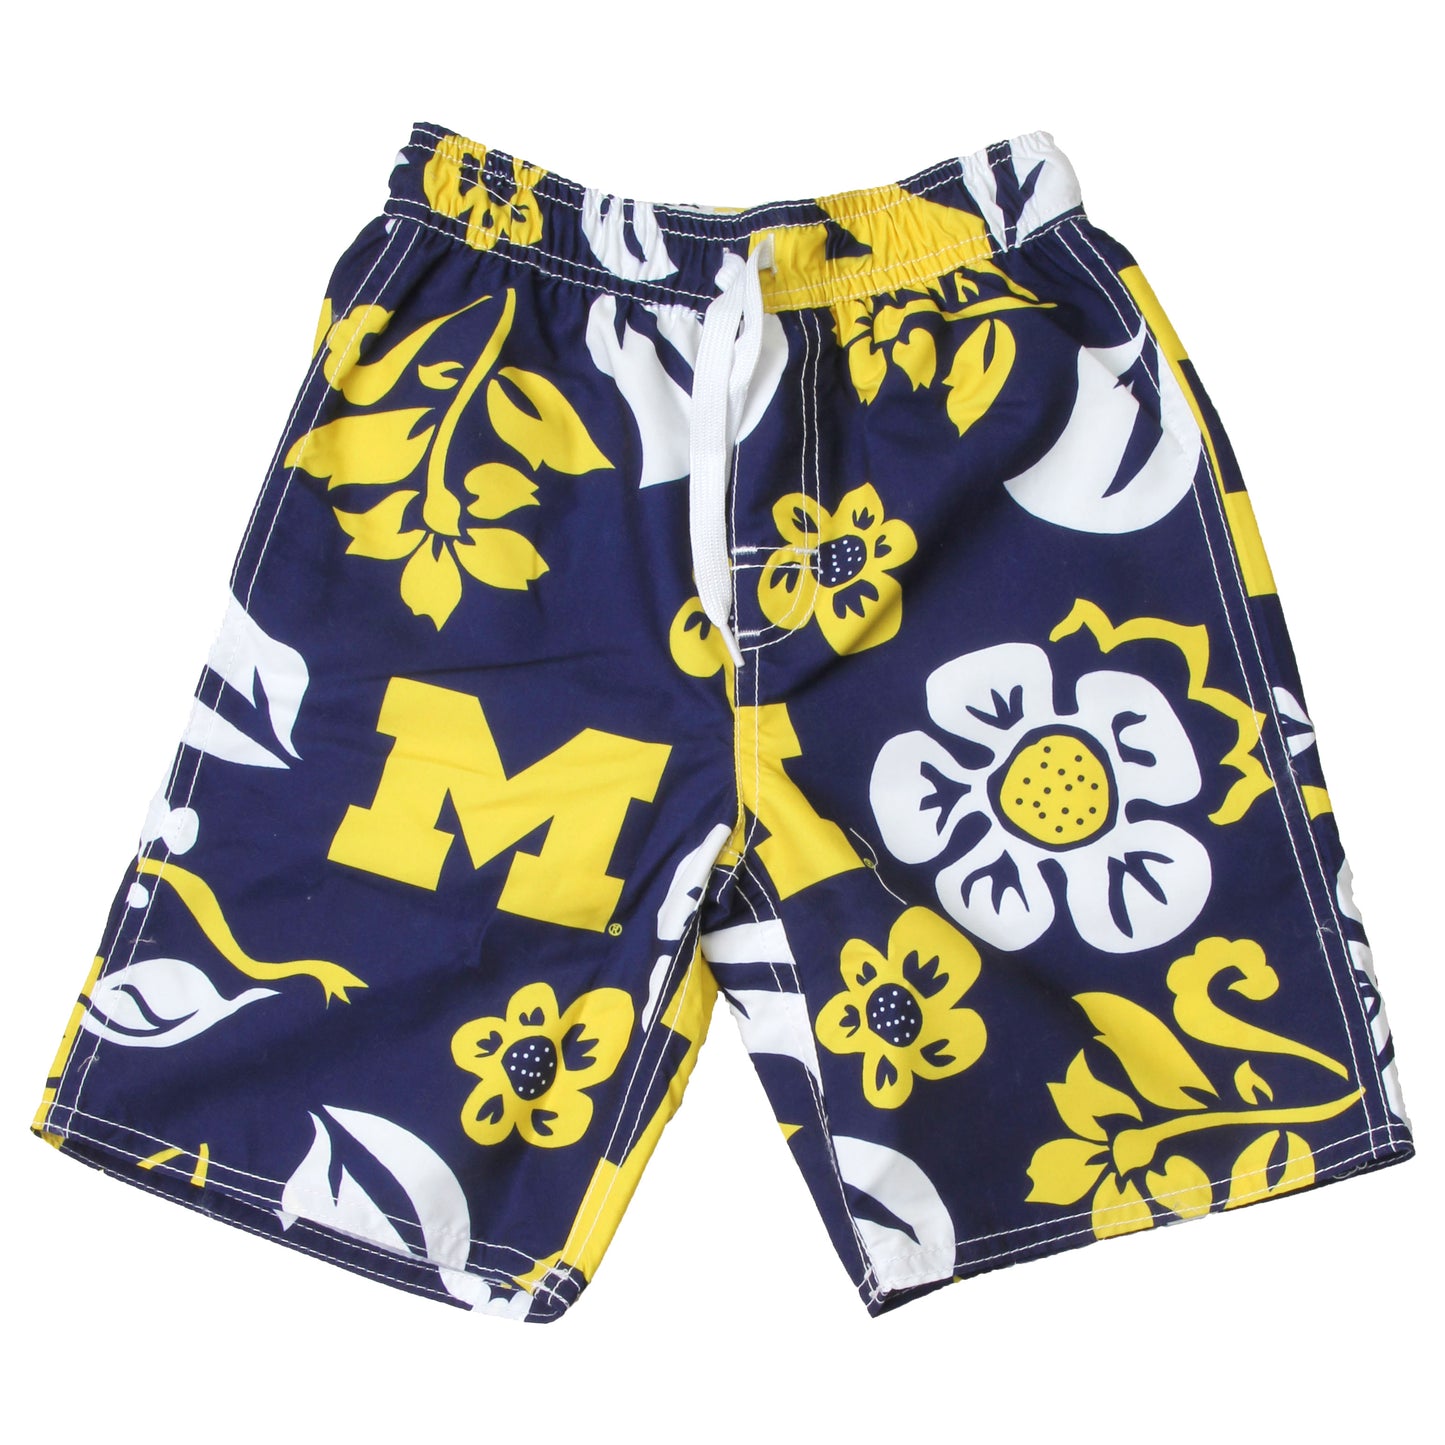 Wes and Willy Michigan Wolverines Boy's Floral Trunks